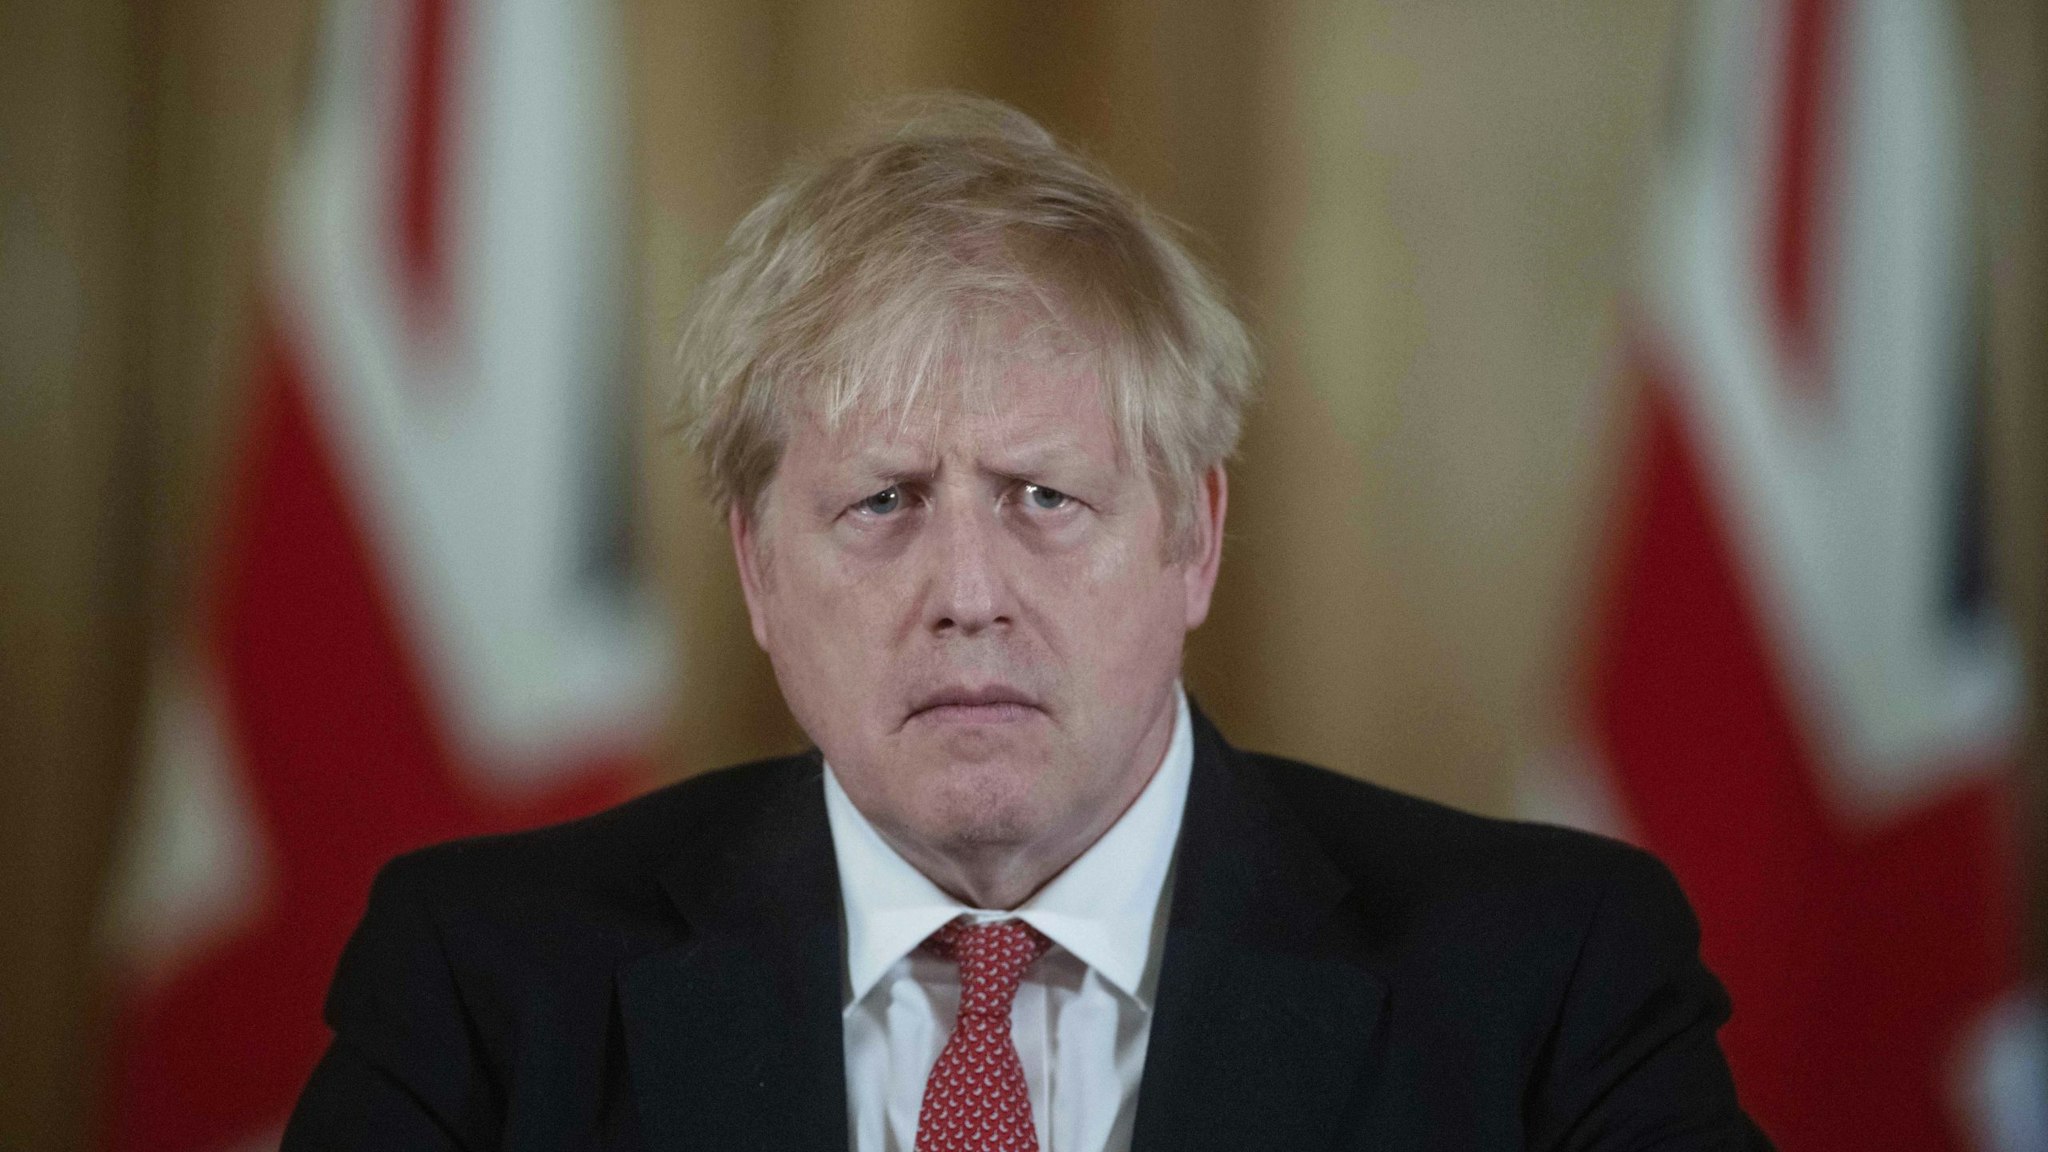 Boris Johnson, U.K. prime minister, pauses while speaking during a daily coronavirus briefing inside number 10 Downing Street in London, U.K., on Friday, March 20, 2020. Johnson ordered pubs, restaurants and leisure centers across the country to close from Friday night in a bid to slow the spread of the coronavirus pandemic. Photographer: Julian Simmonds/The Daily Telegraph/Bloomberg via Getty Images